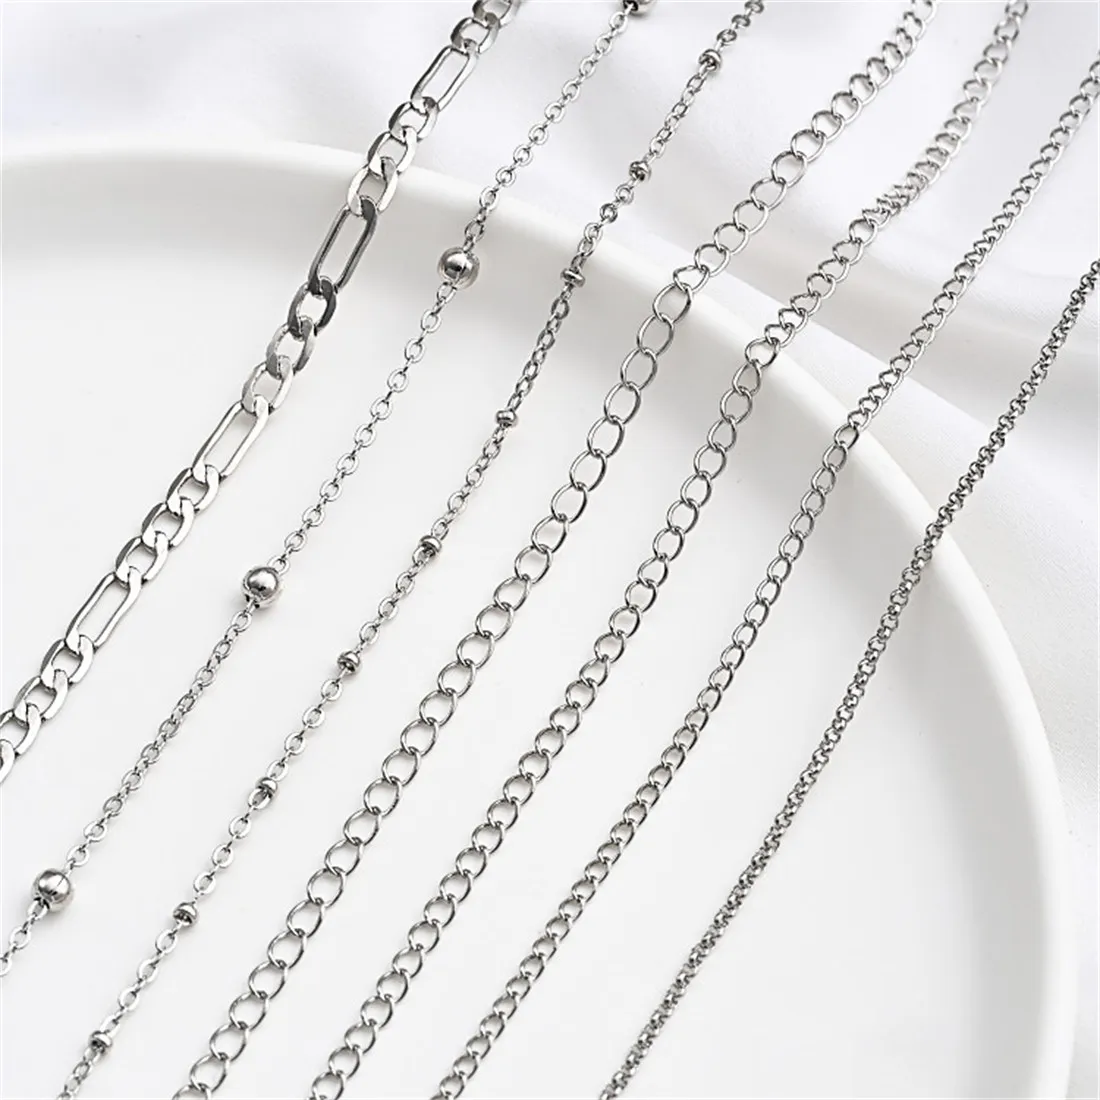 Plating Platinum Ponytail Chain, Pearl Chain, Clip Bead Chain, Side Chain, Handmade DIY Bracelet, Necklace, Jewelry, Loose Chain